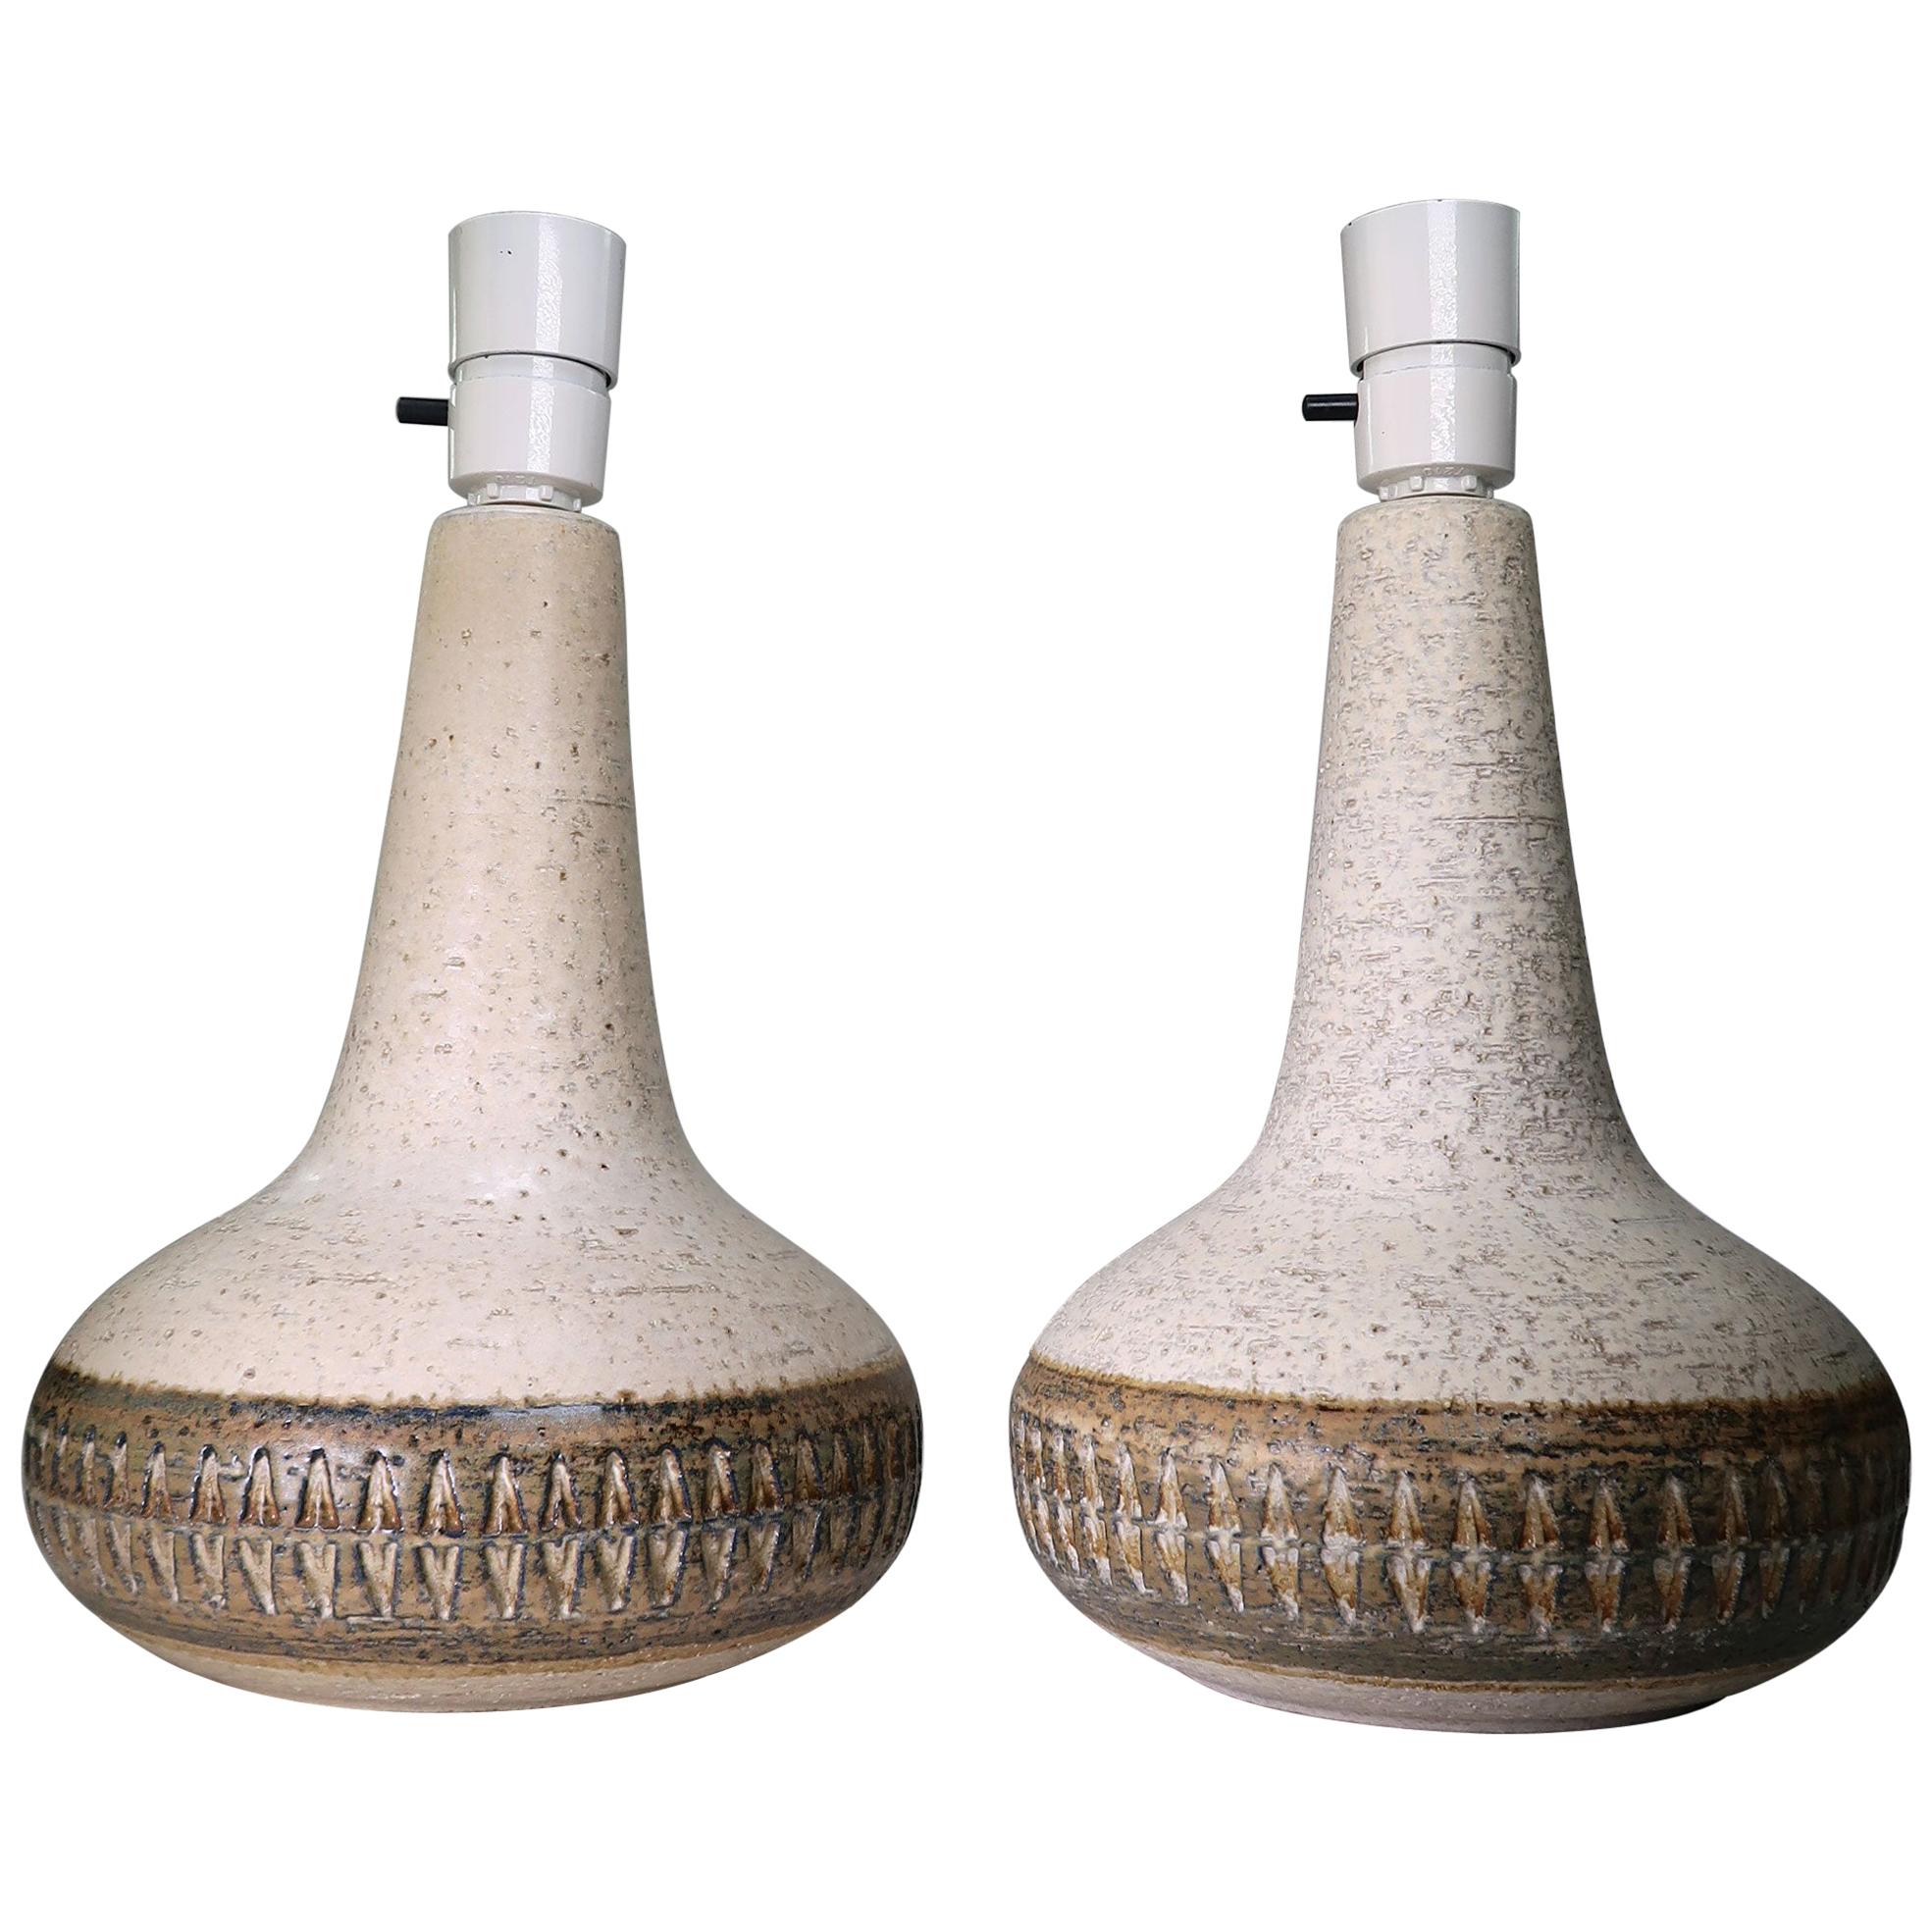 Søholm Handmade Danish Cream, Brown Stoneware Table Lamps, 1960s For Sale